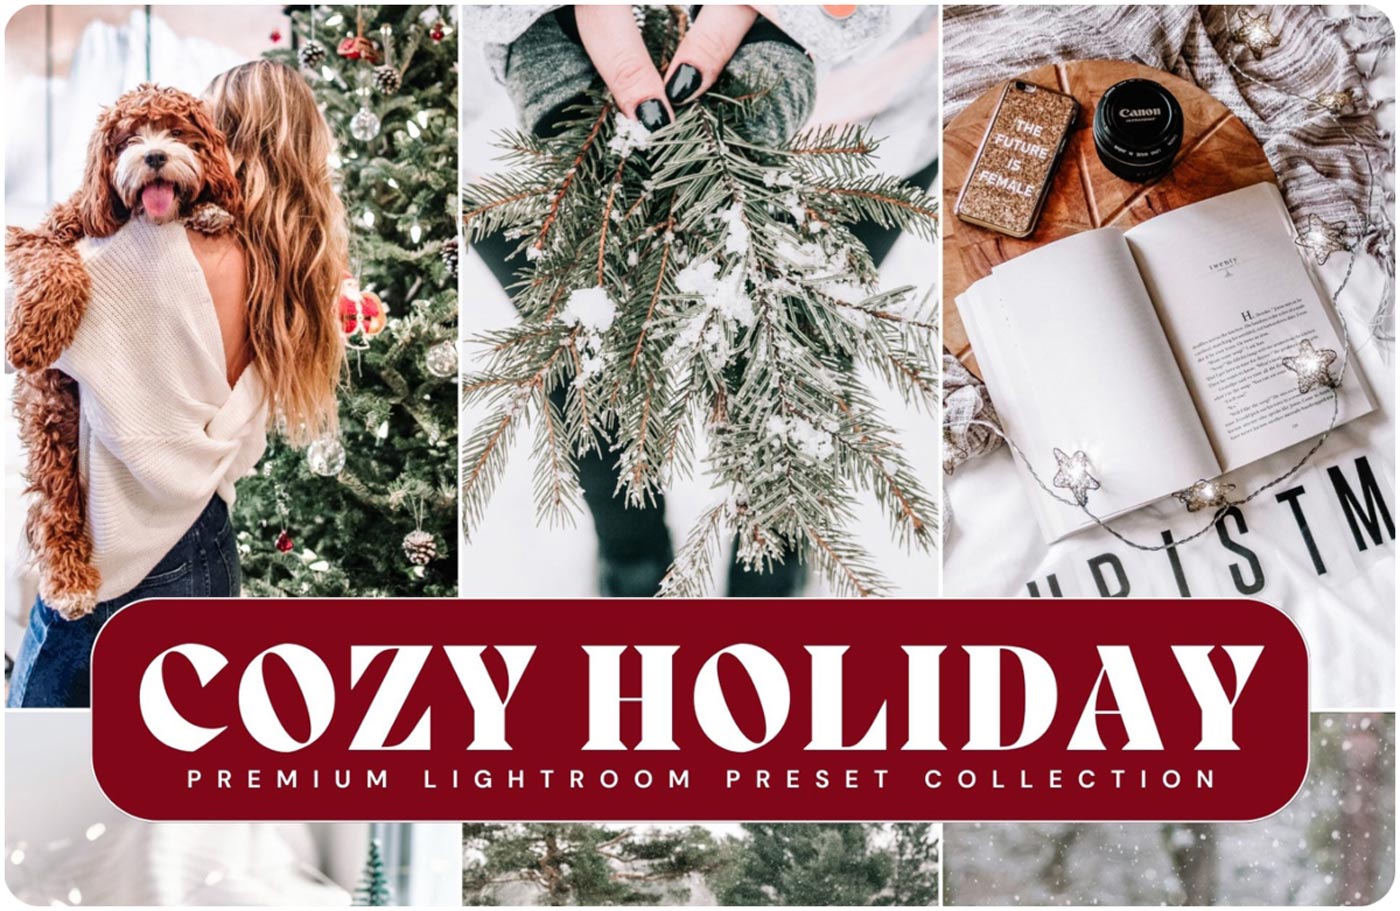 Cozy Holiday Presets Best Christmas Lightroom Presets